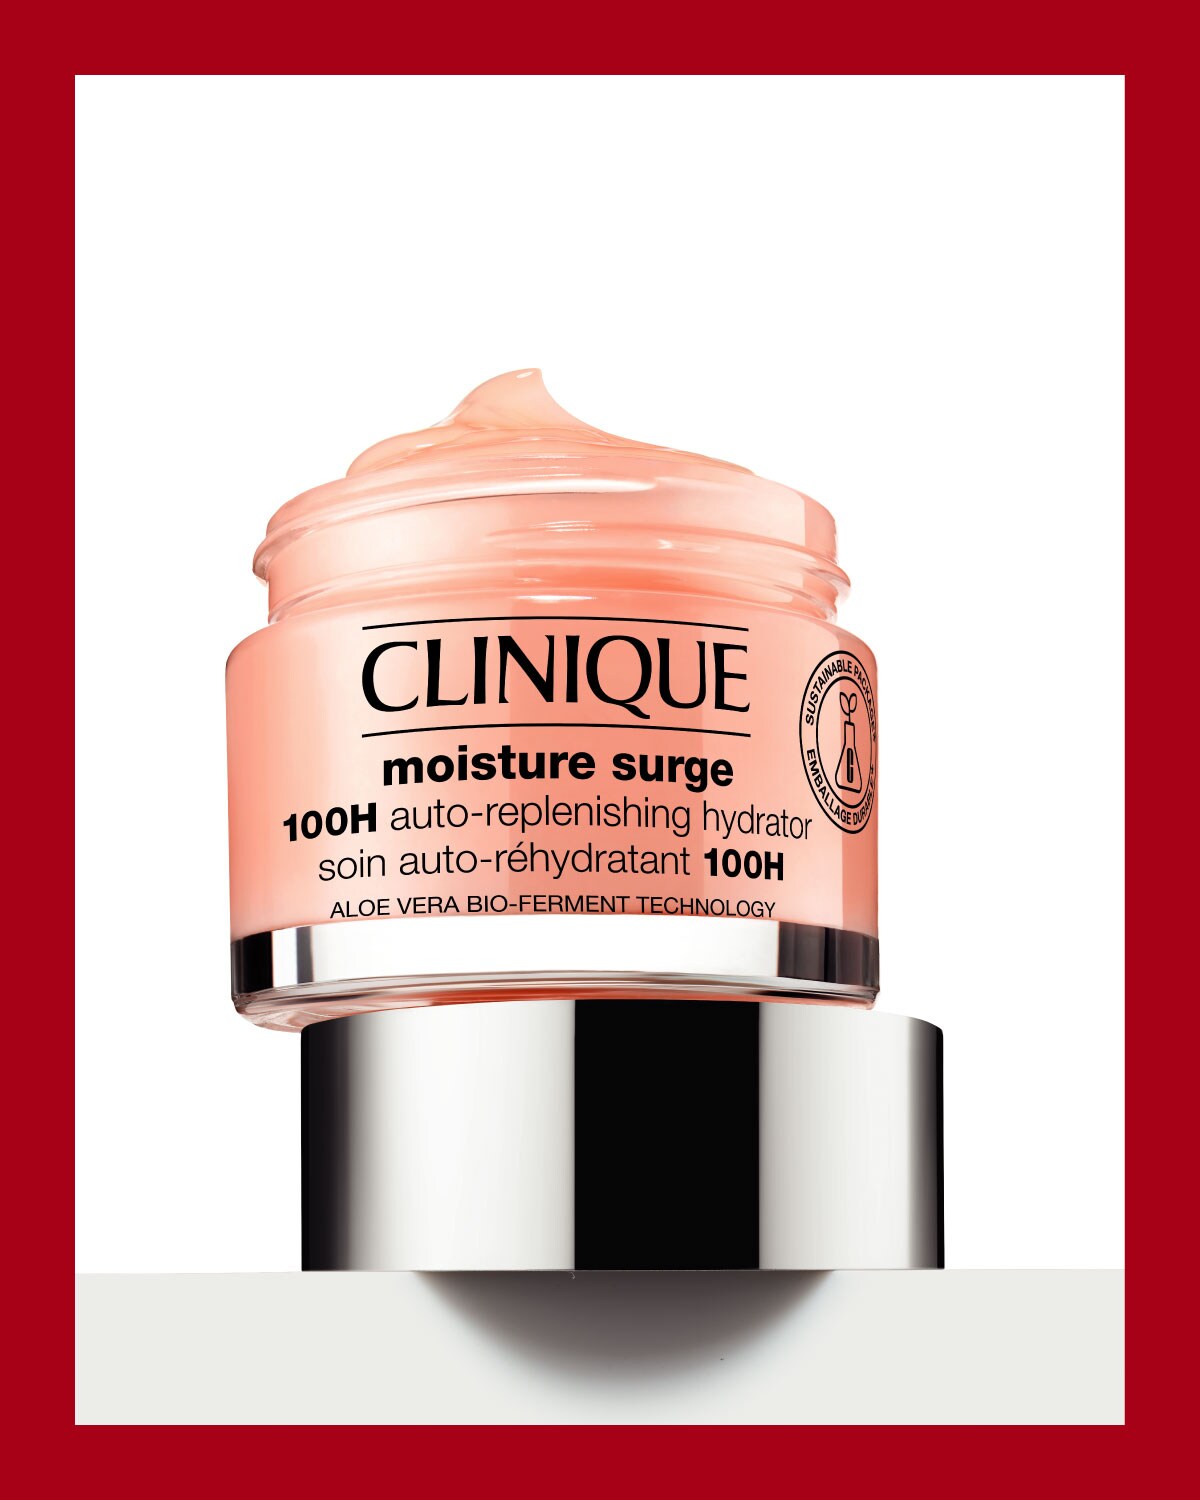 Moisturizer that lasts 100 hours.